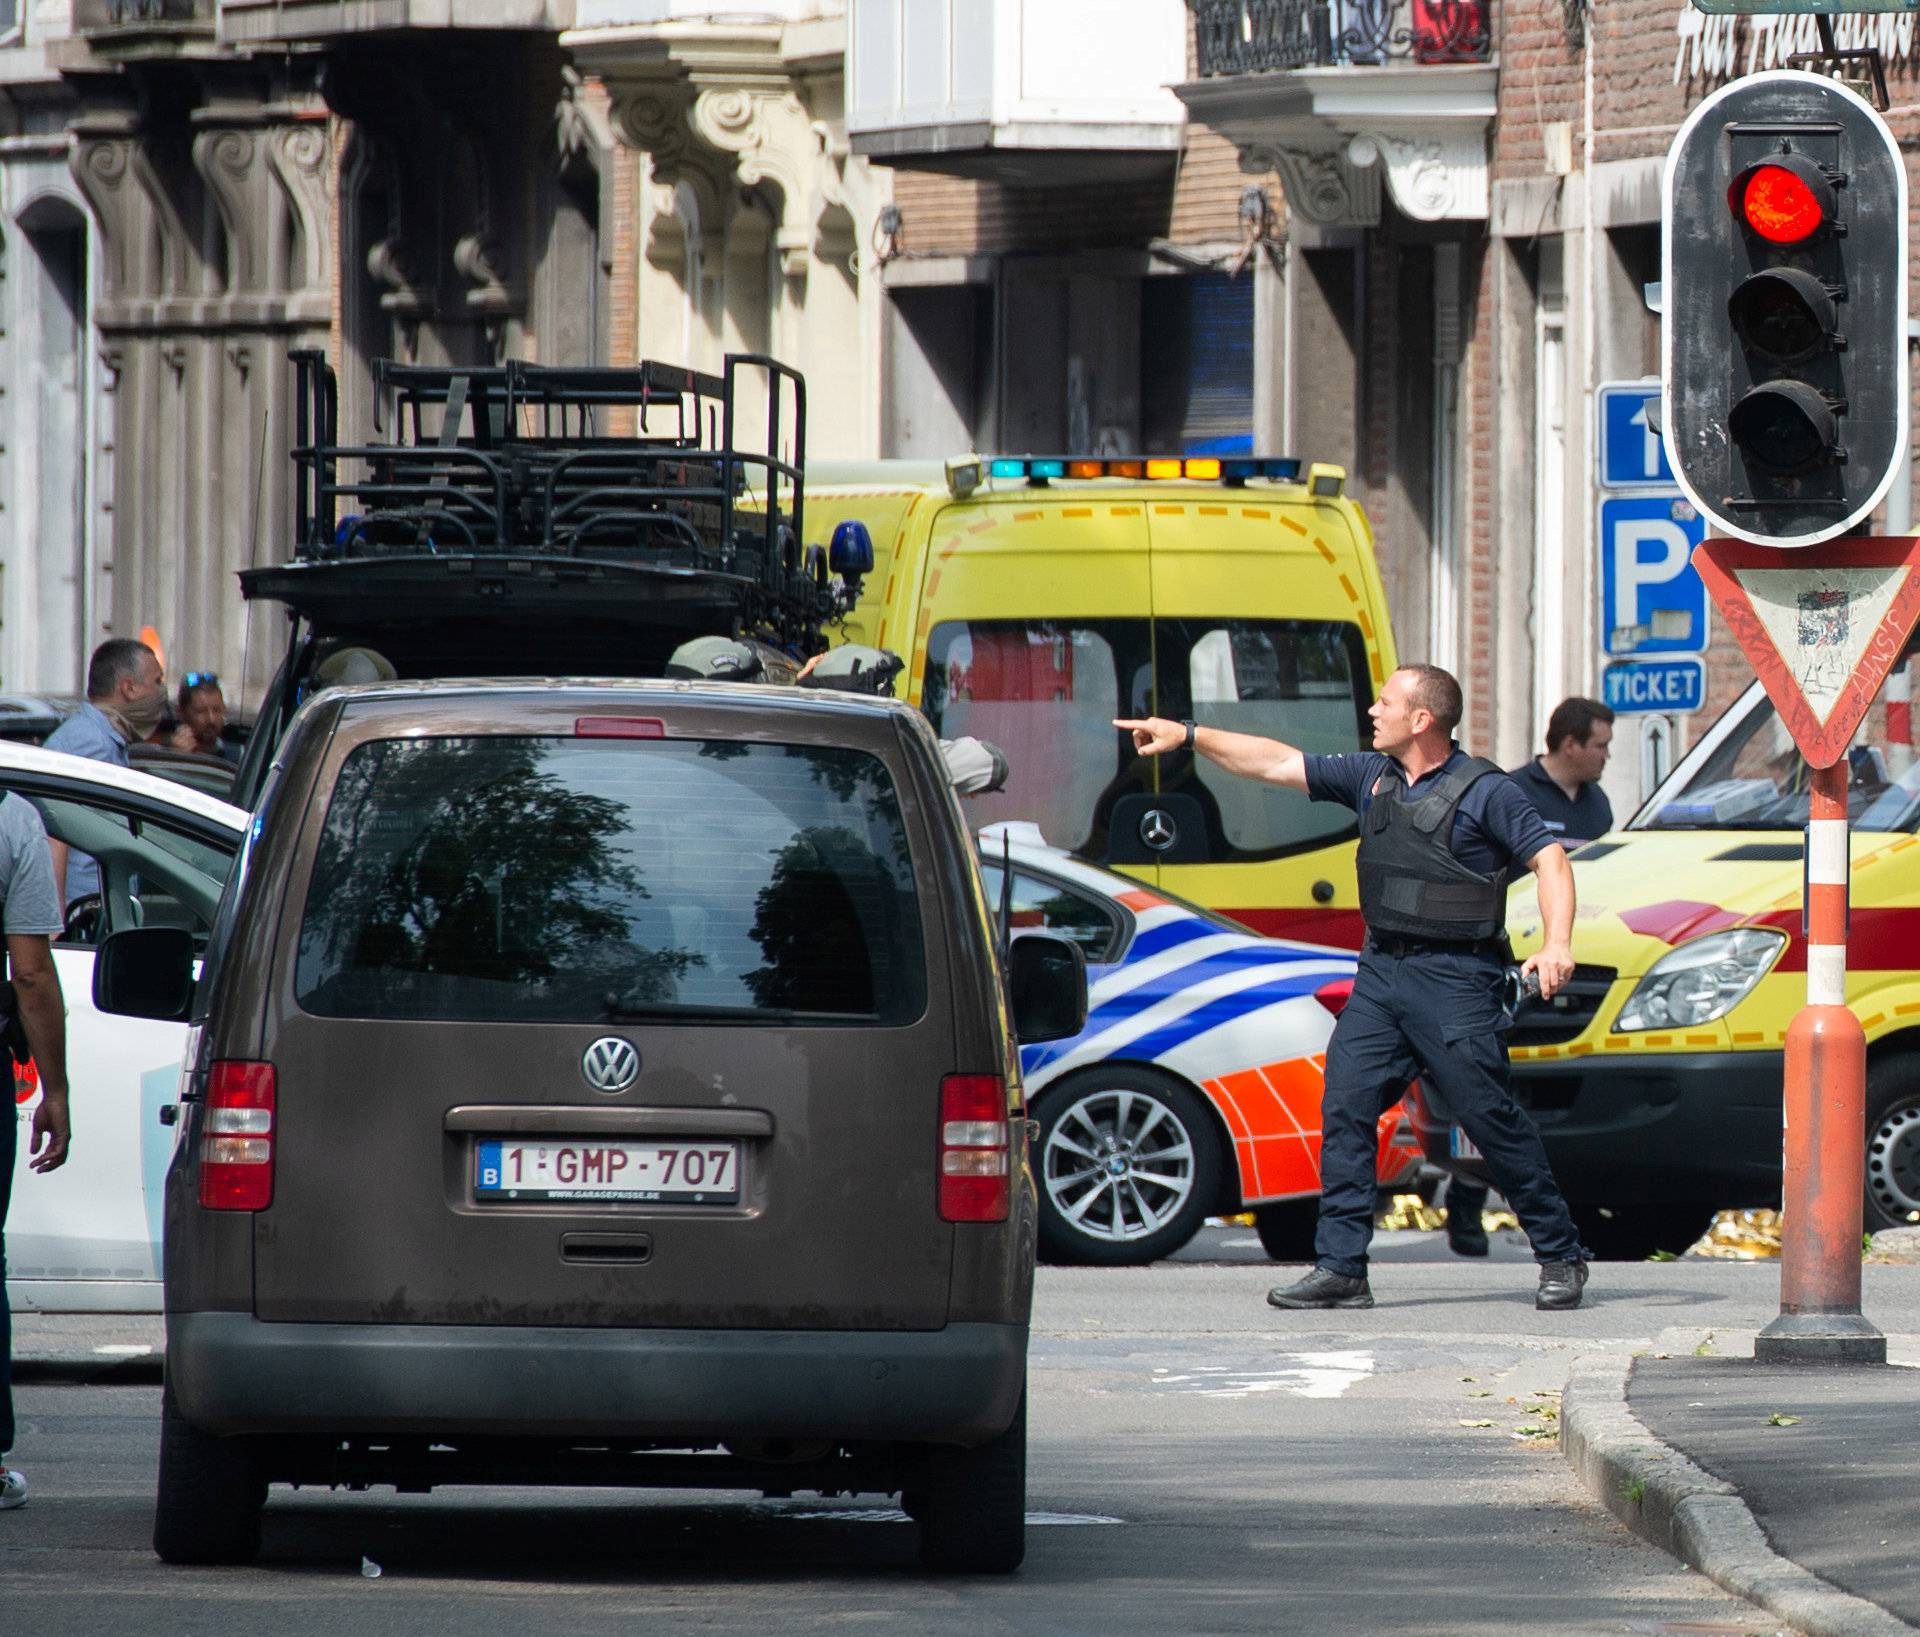 Police special forces are seen during a shooting in Liege